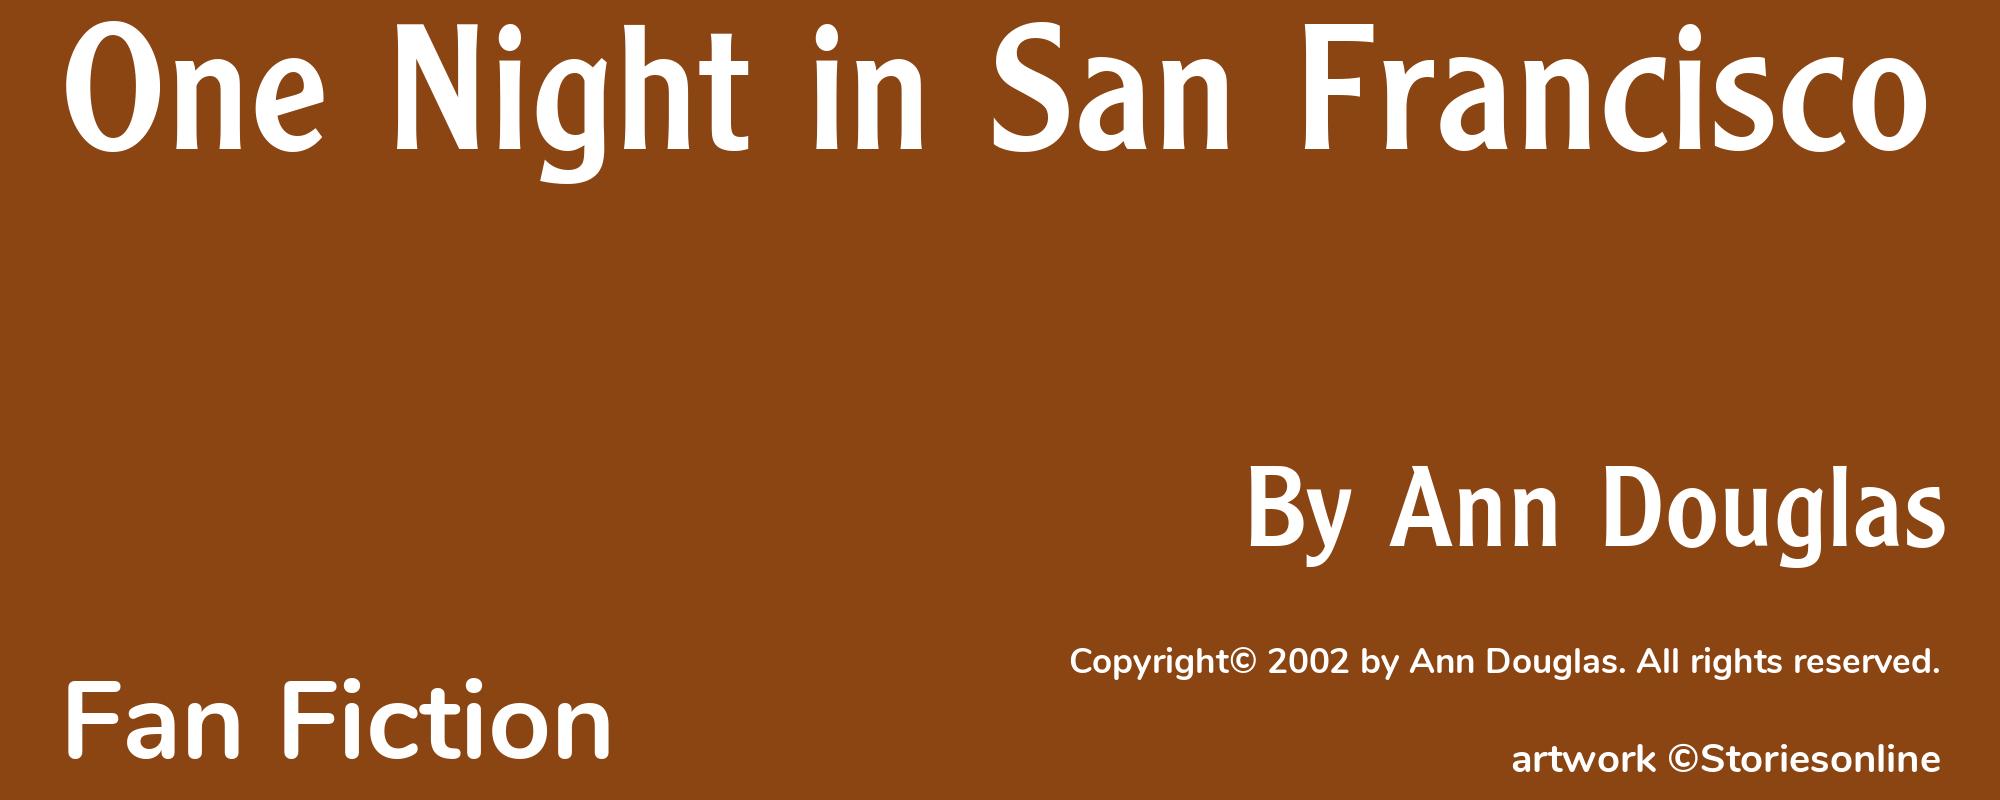 One Night in San Francisco - Cover